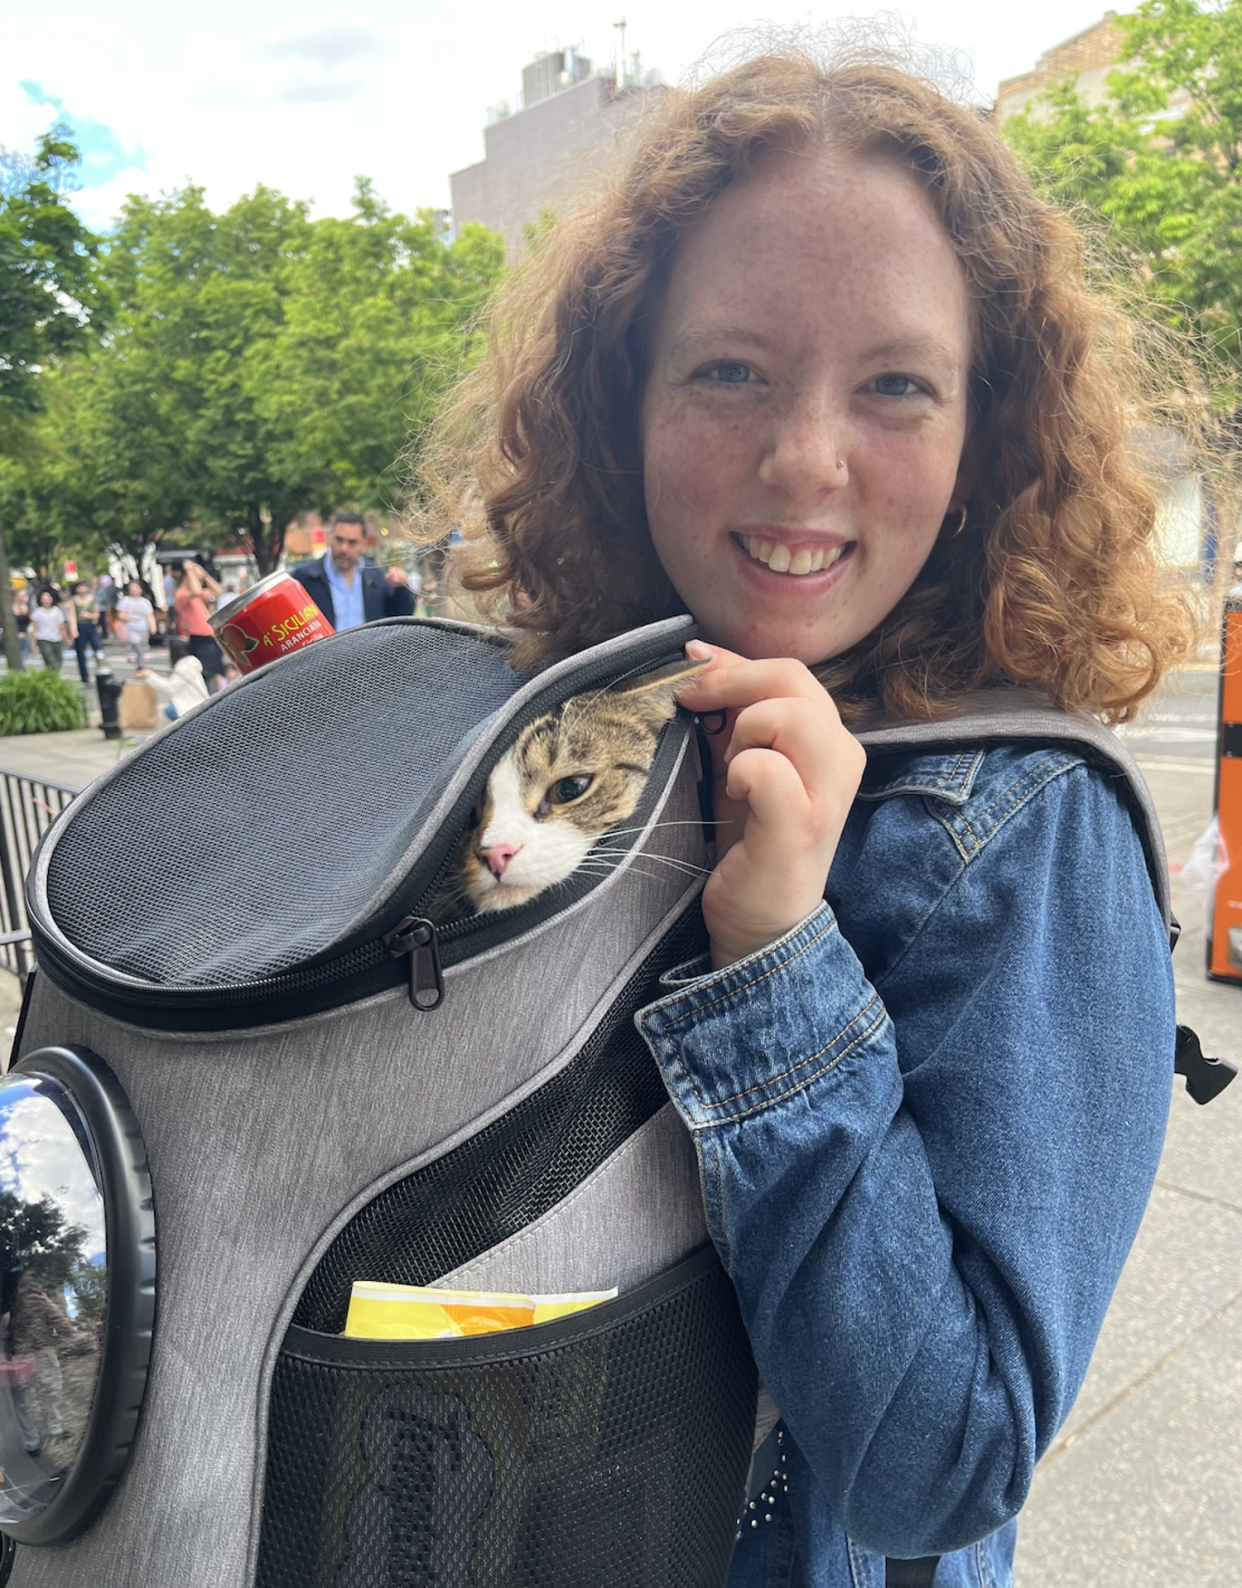 The Fat Cat Mini Backpack lets Kiwi see the world around him while keeping him safe.  (Courtesy Kelsey Fredricks)